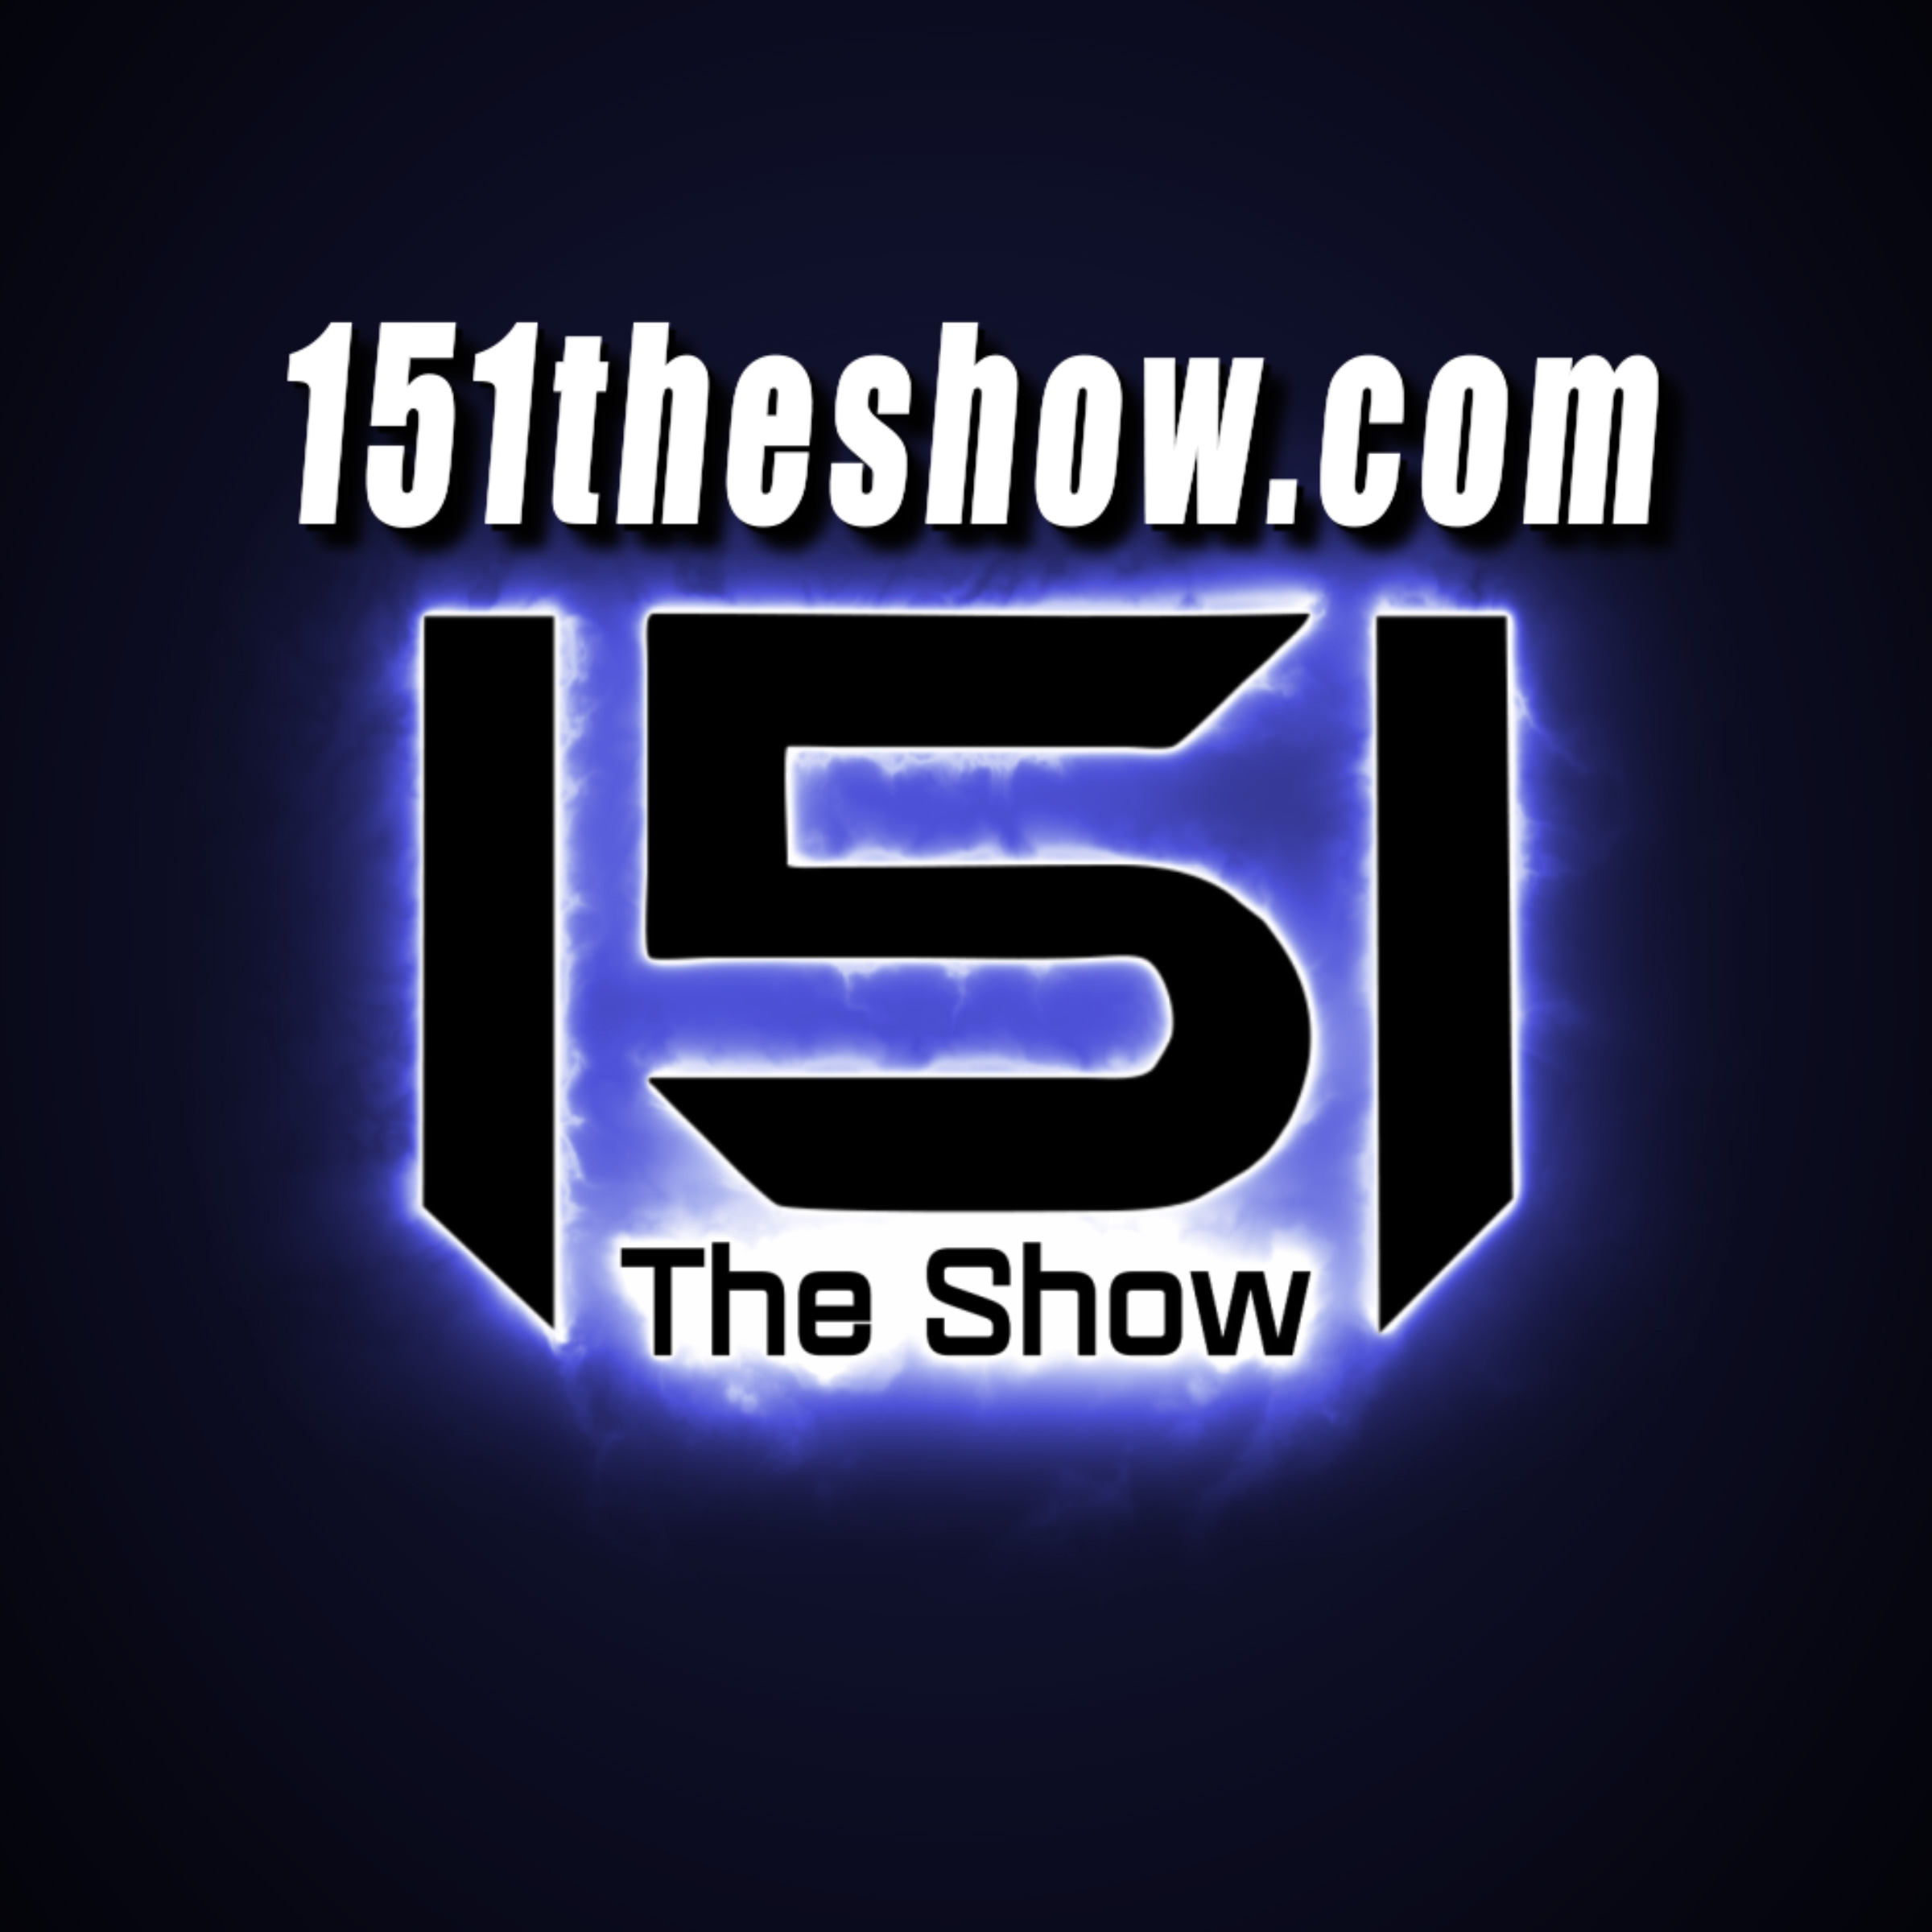 151 The Show